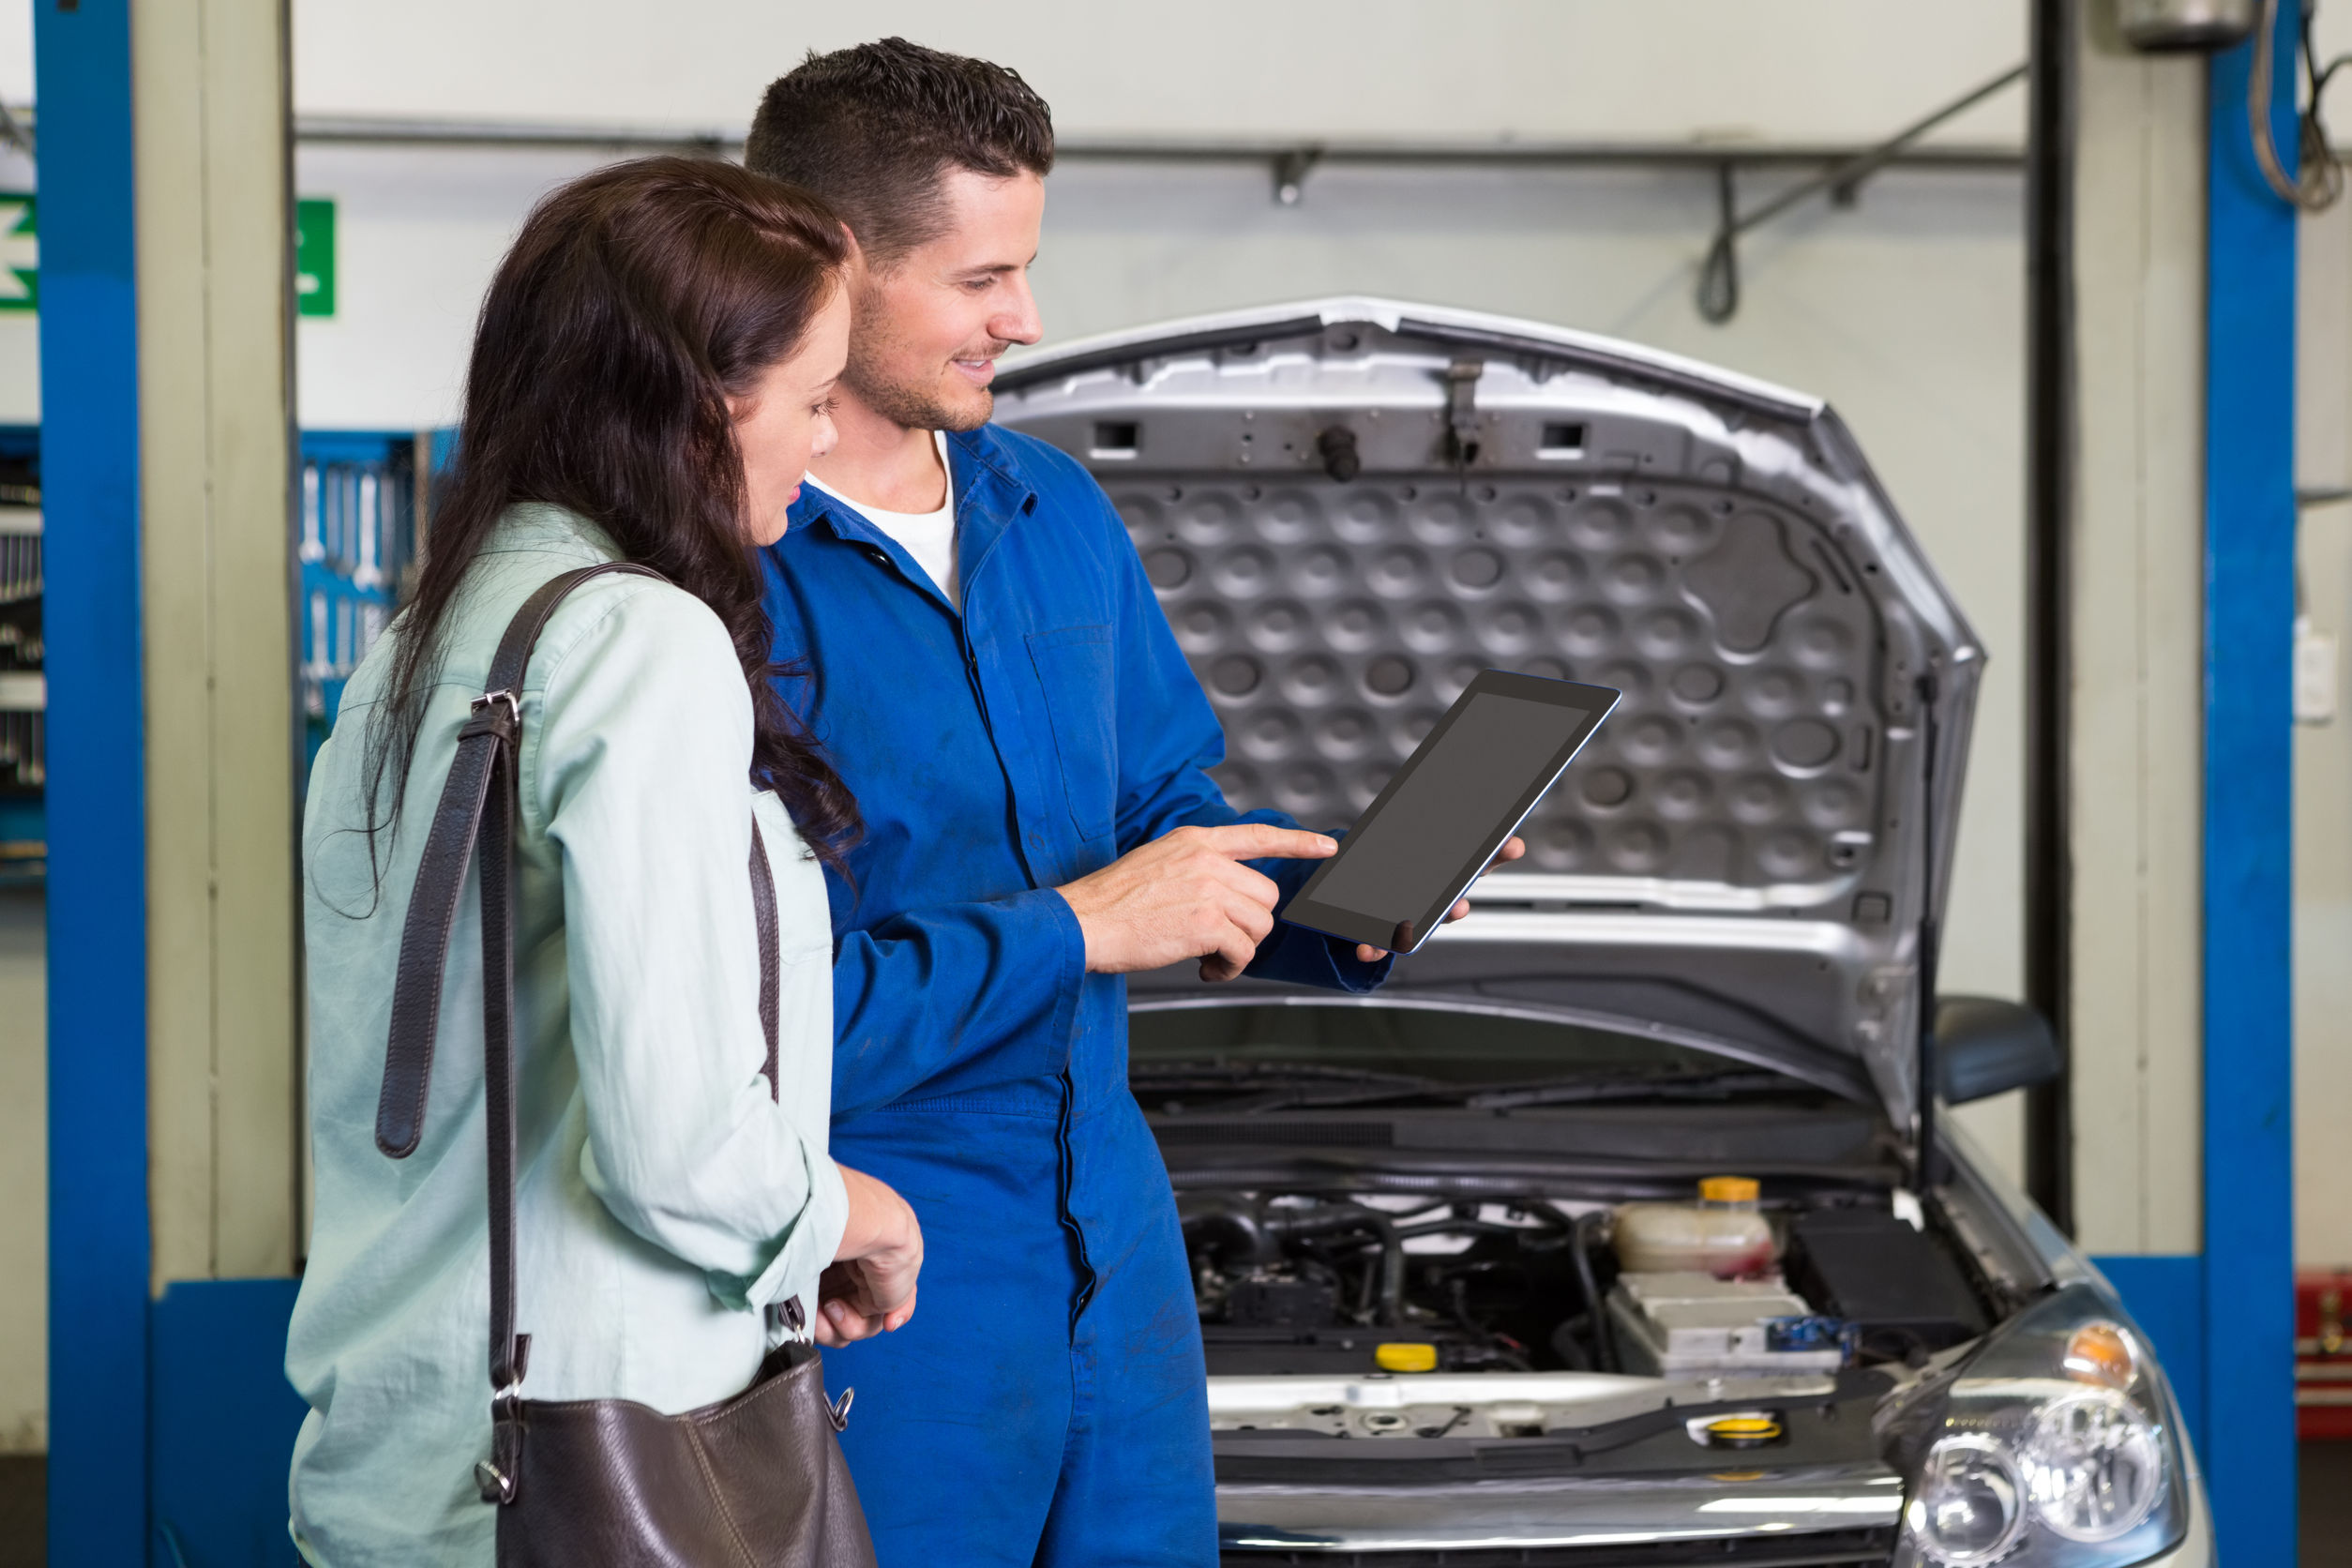 Auto repair shop owner marketing includes finding the right message to the right person that says to the reader. "I'll check him out first." Our Mega Power Marketing Program shows you how.